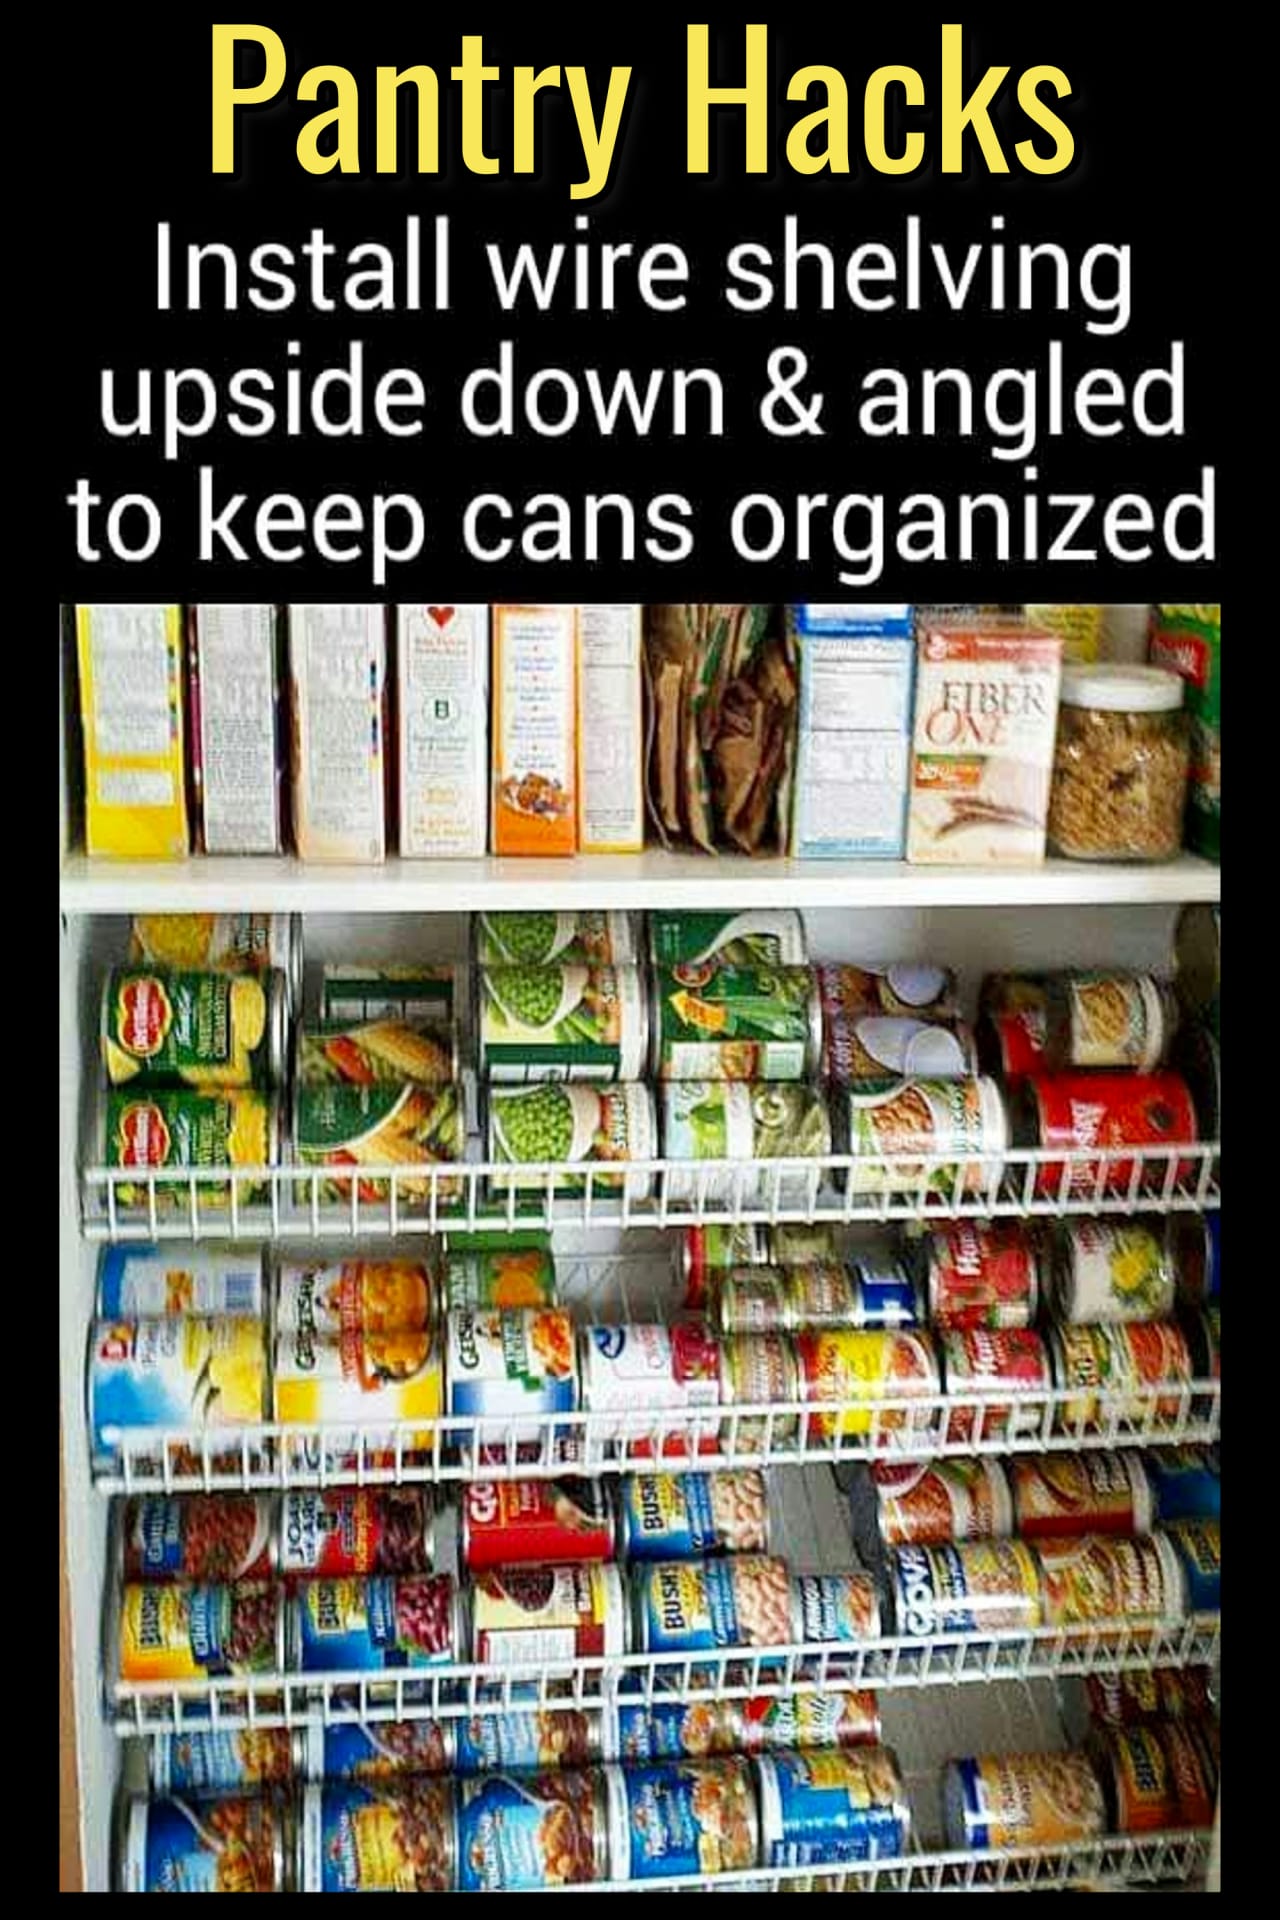 Pantry Organization Ideas - Pantry Shelves Organization Hack for Better Food Storage - how to organize canned goods in our pantry - Pantry Shelving Ideas - Easy DIY wire shelving storage ideas for an organized pantry